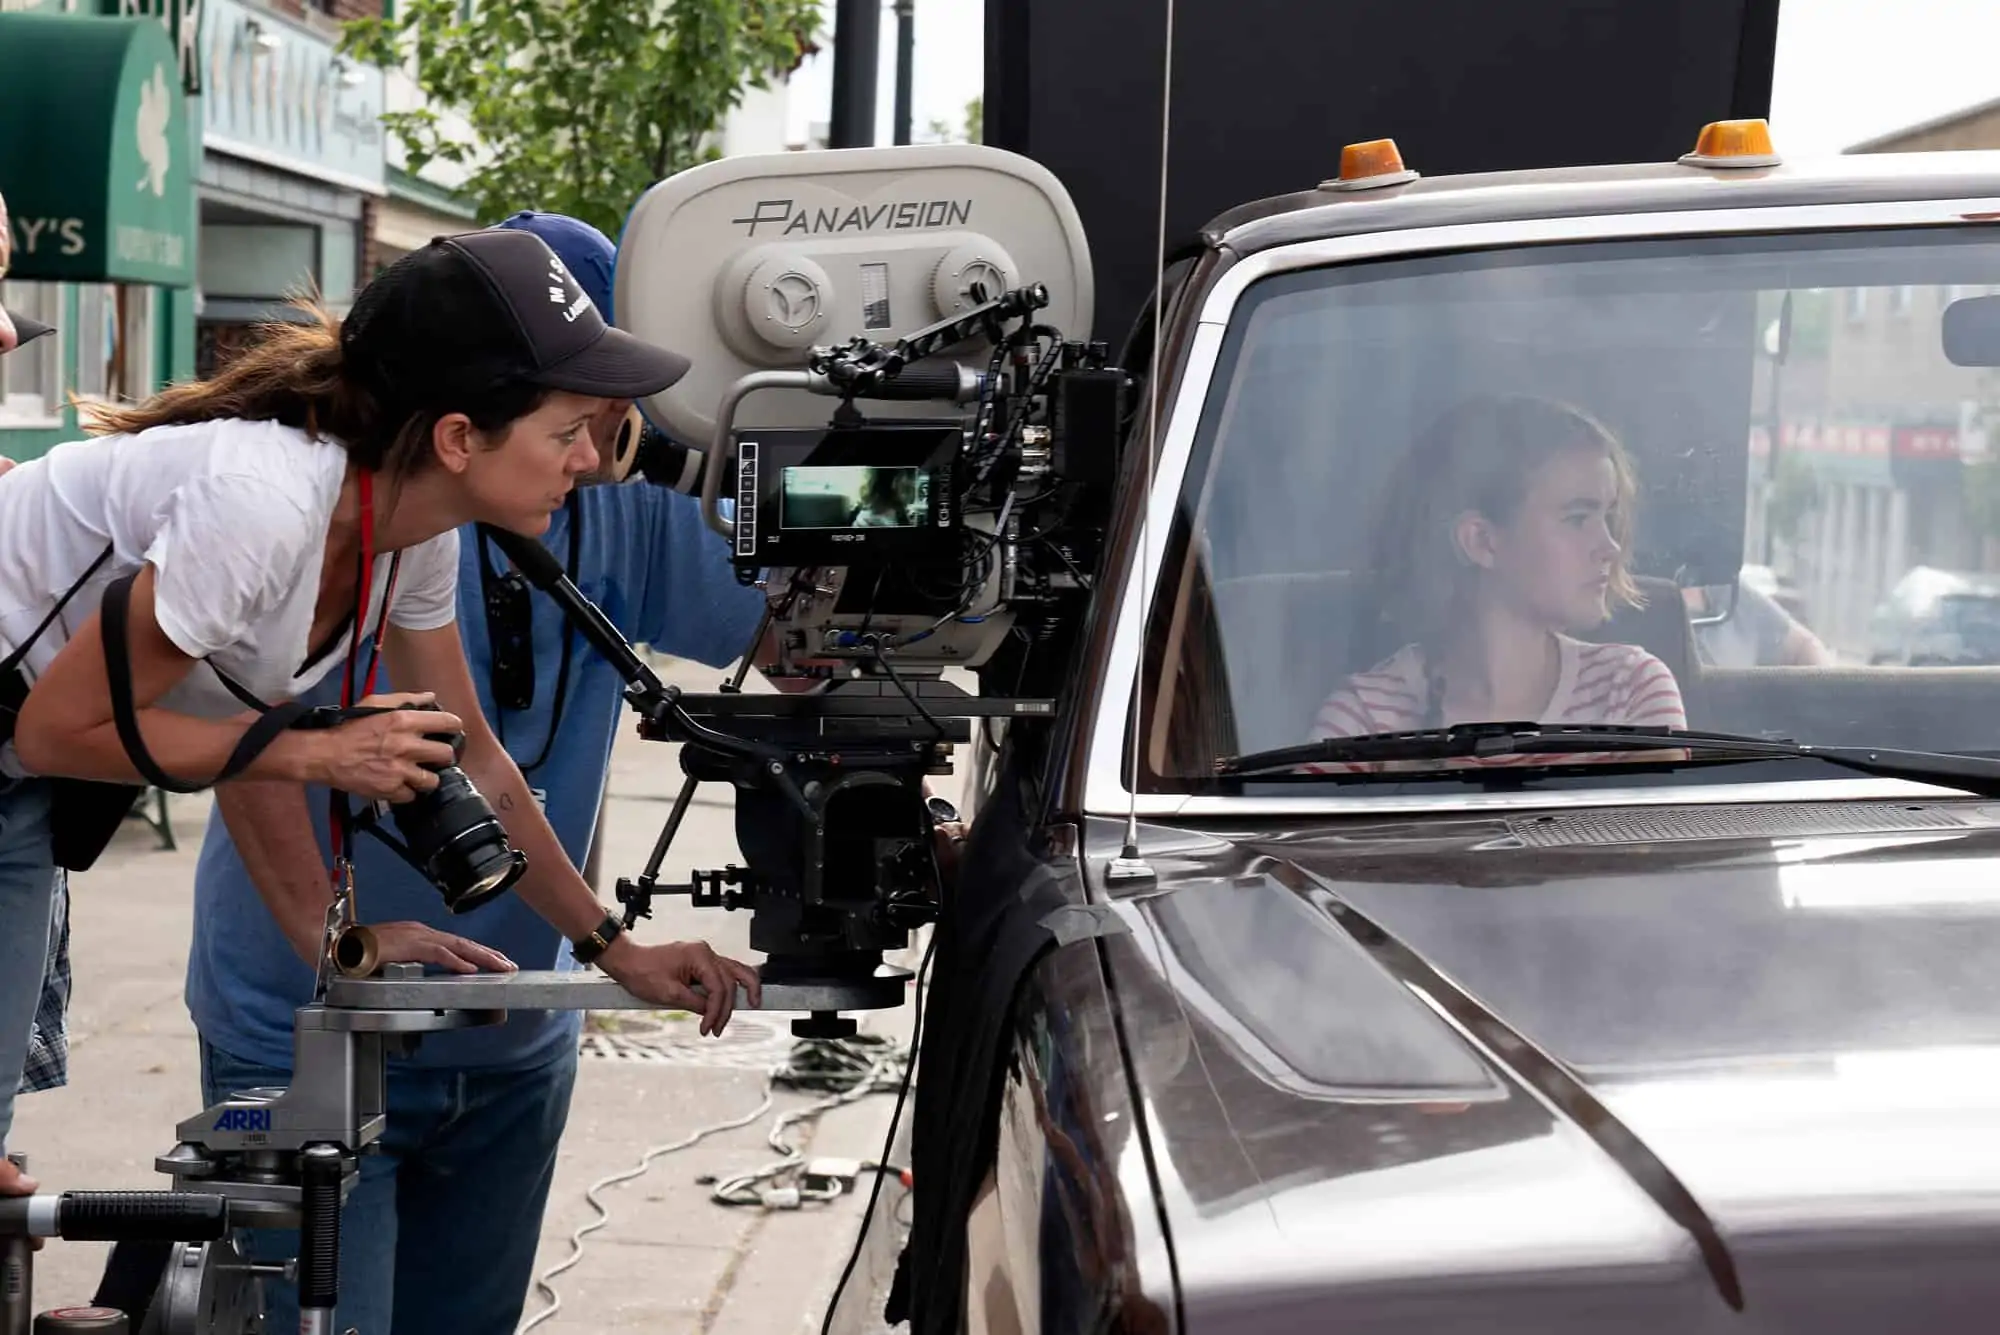 Cinematographer Polly Morgan, left, and Millicent Simmonds on the set of Paramount Pictures' "A Quiet Place 2."